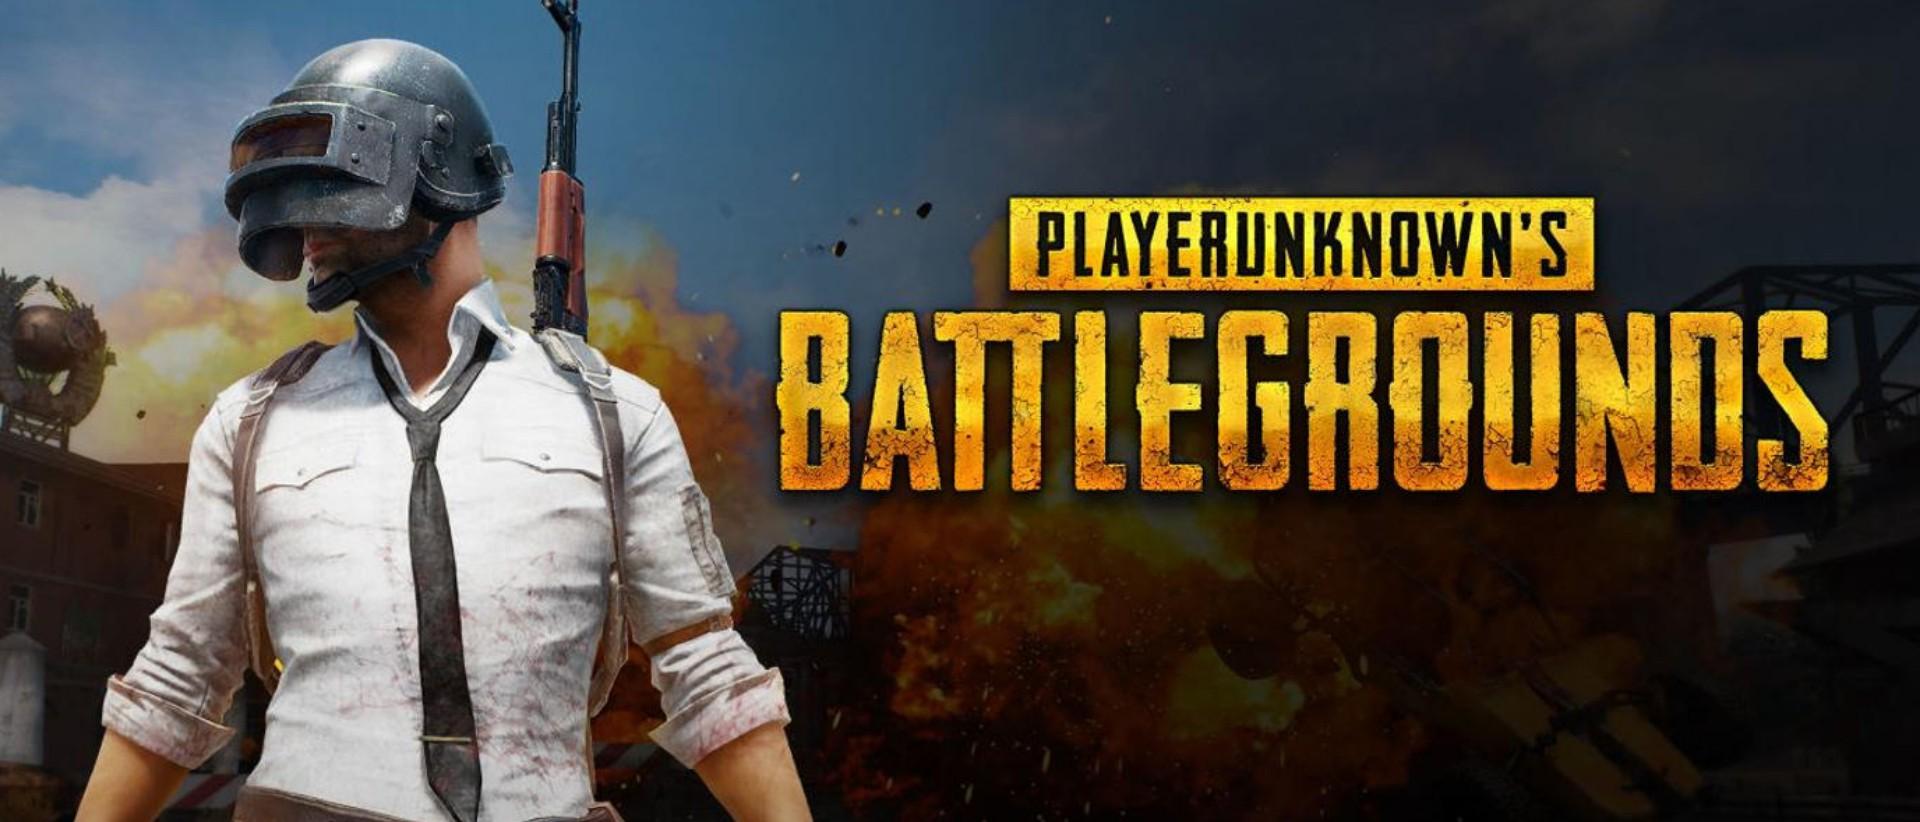 Building the Best PC for PlayerUnknown's Battlegrounds